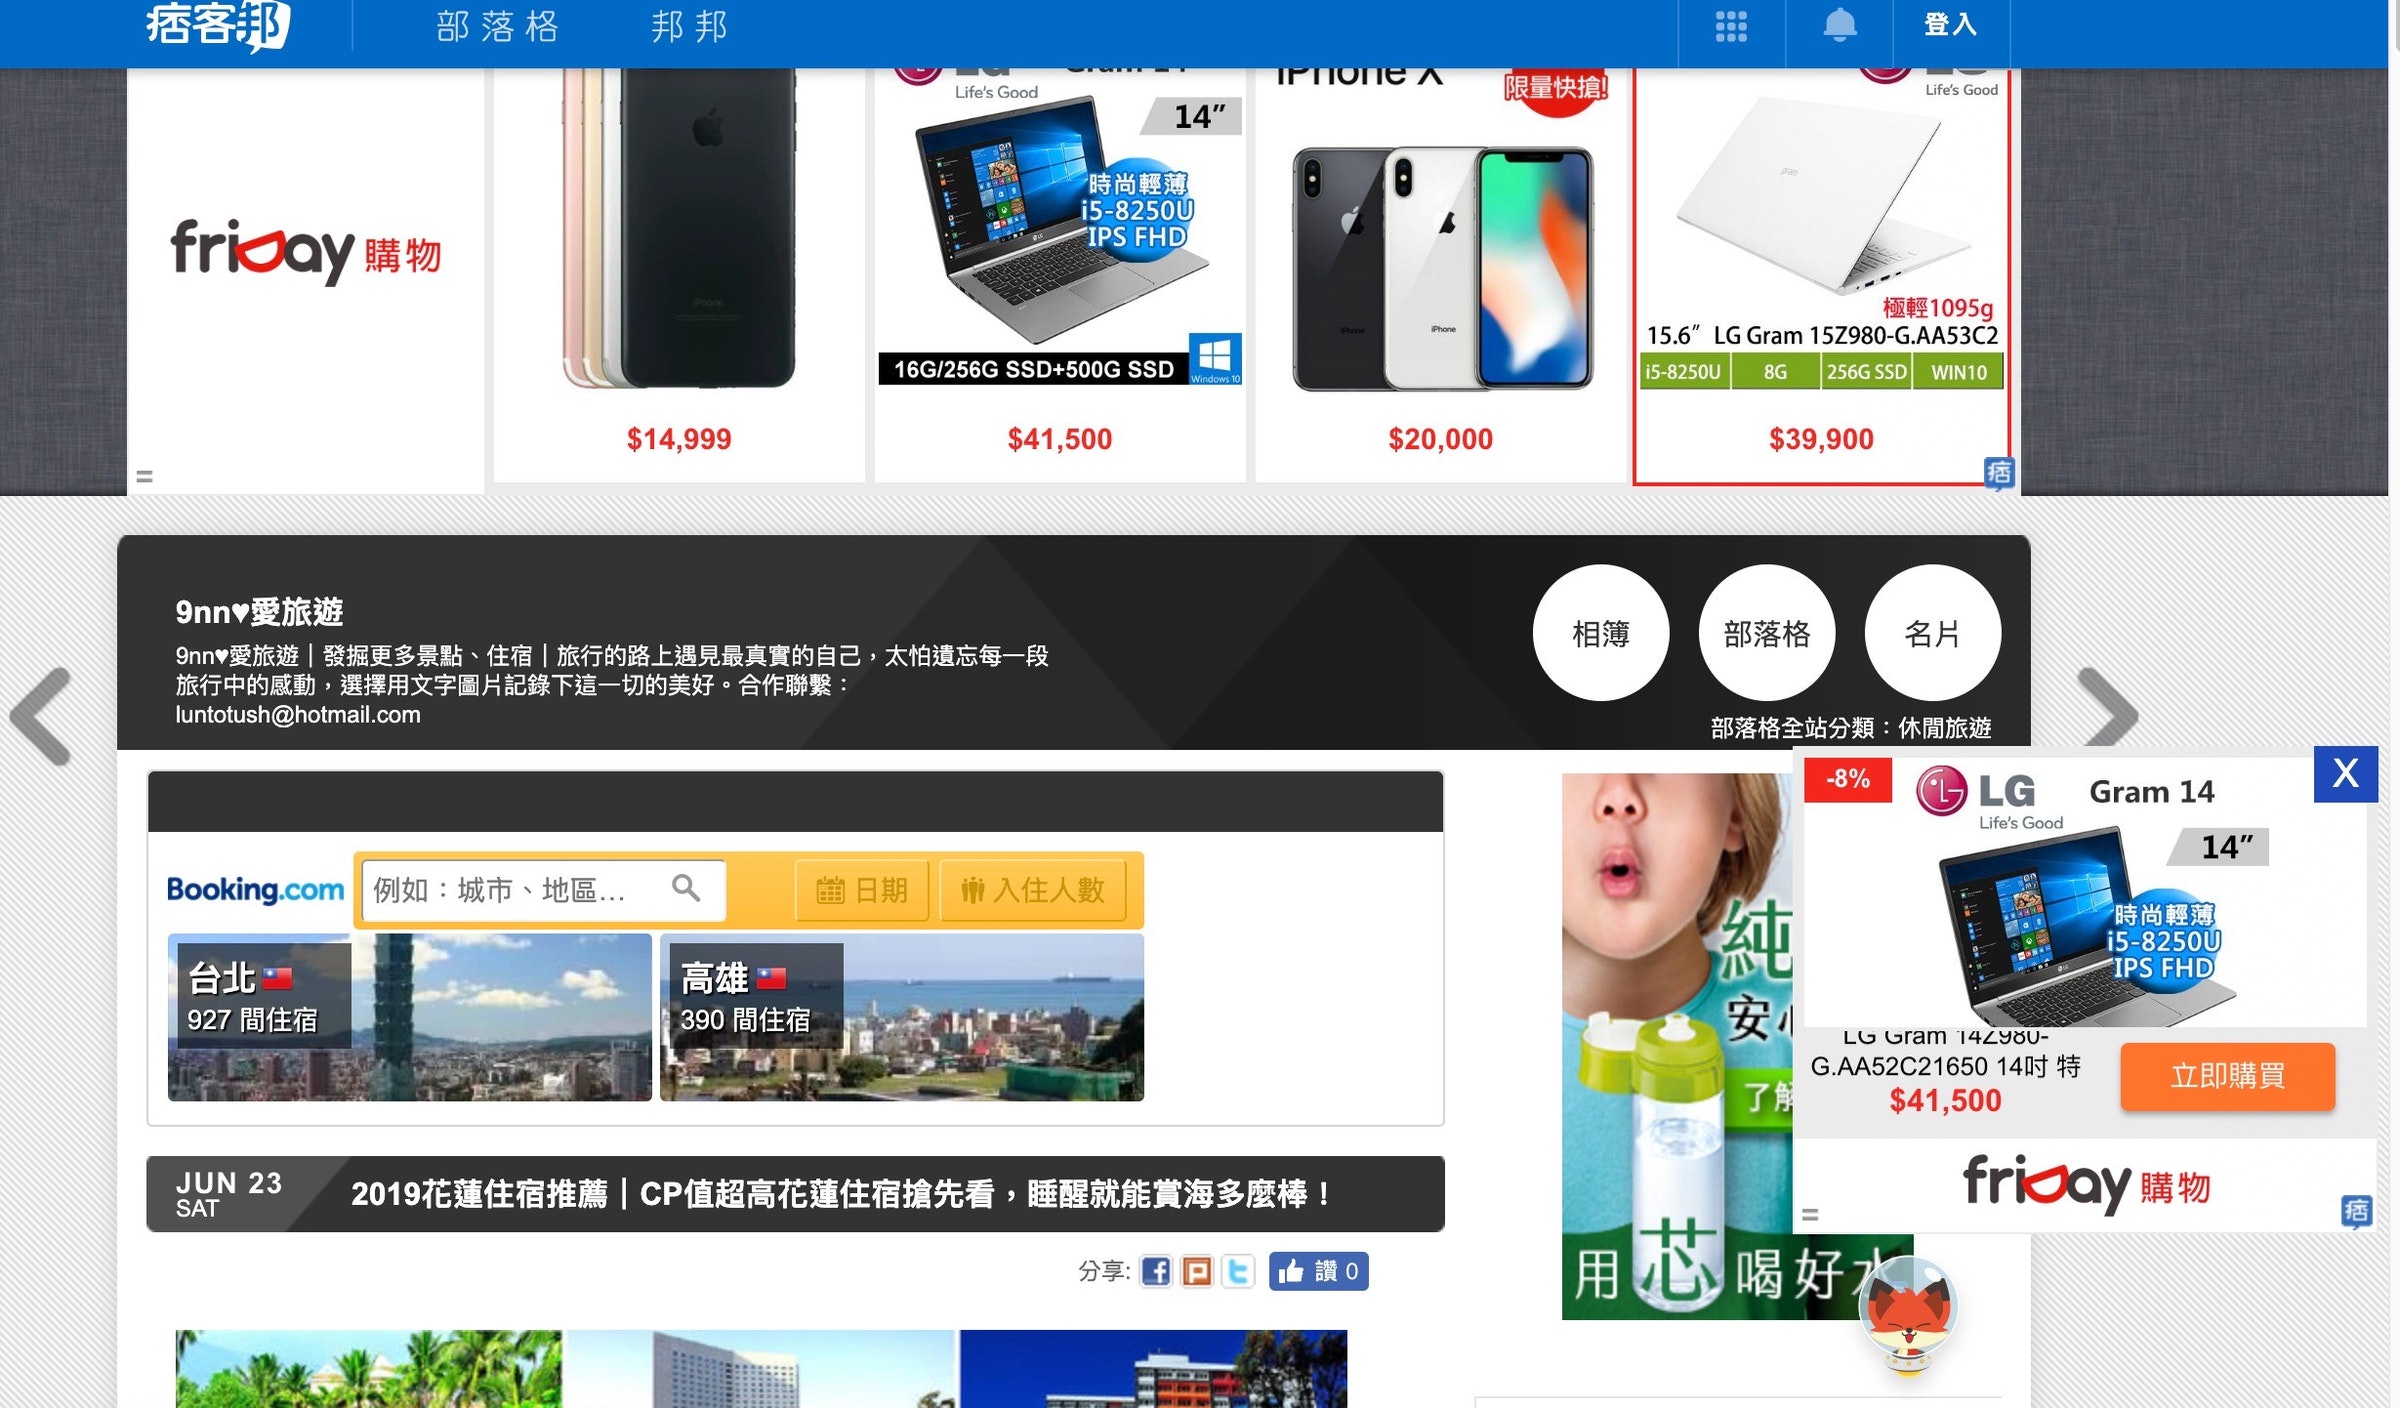 Display advertising, Web page, Font, friDay購物, Advertising, New media, Product design, Product, Gadget, Design, friday 購物, Product, Web page, Website, Display advertising, Advertising, Technology, Screenshot, Multimedia, Font, Electronic device